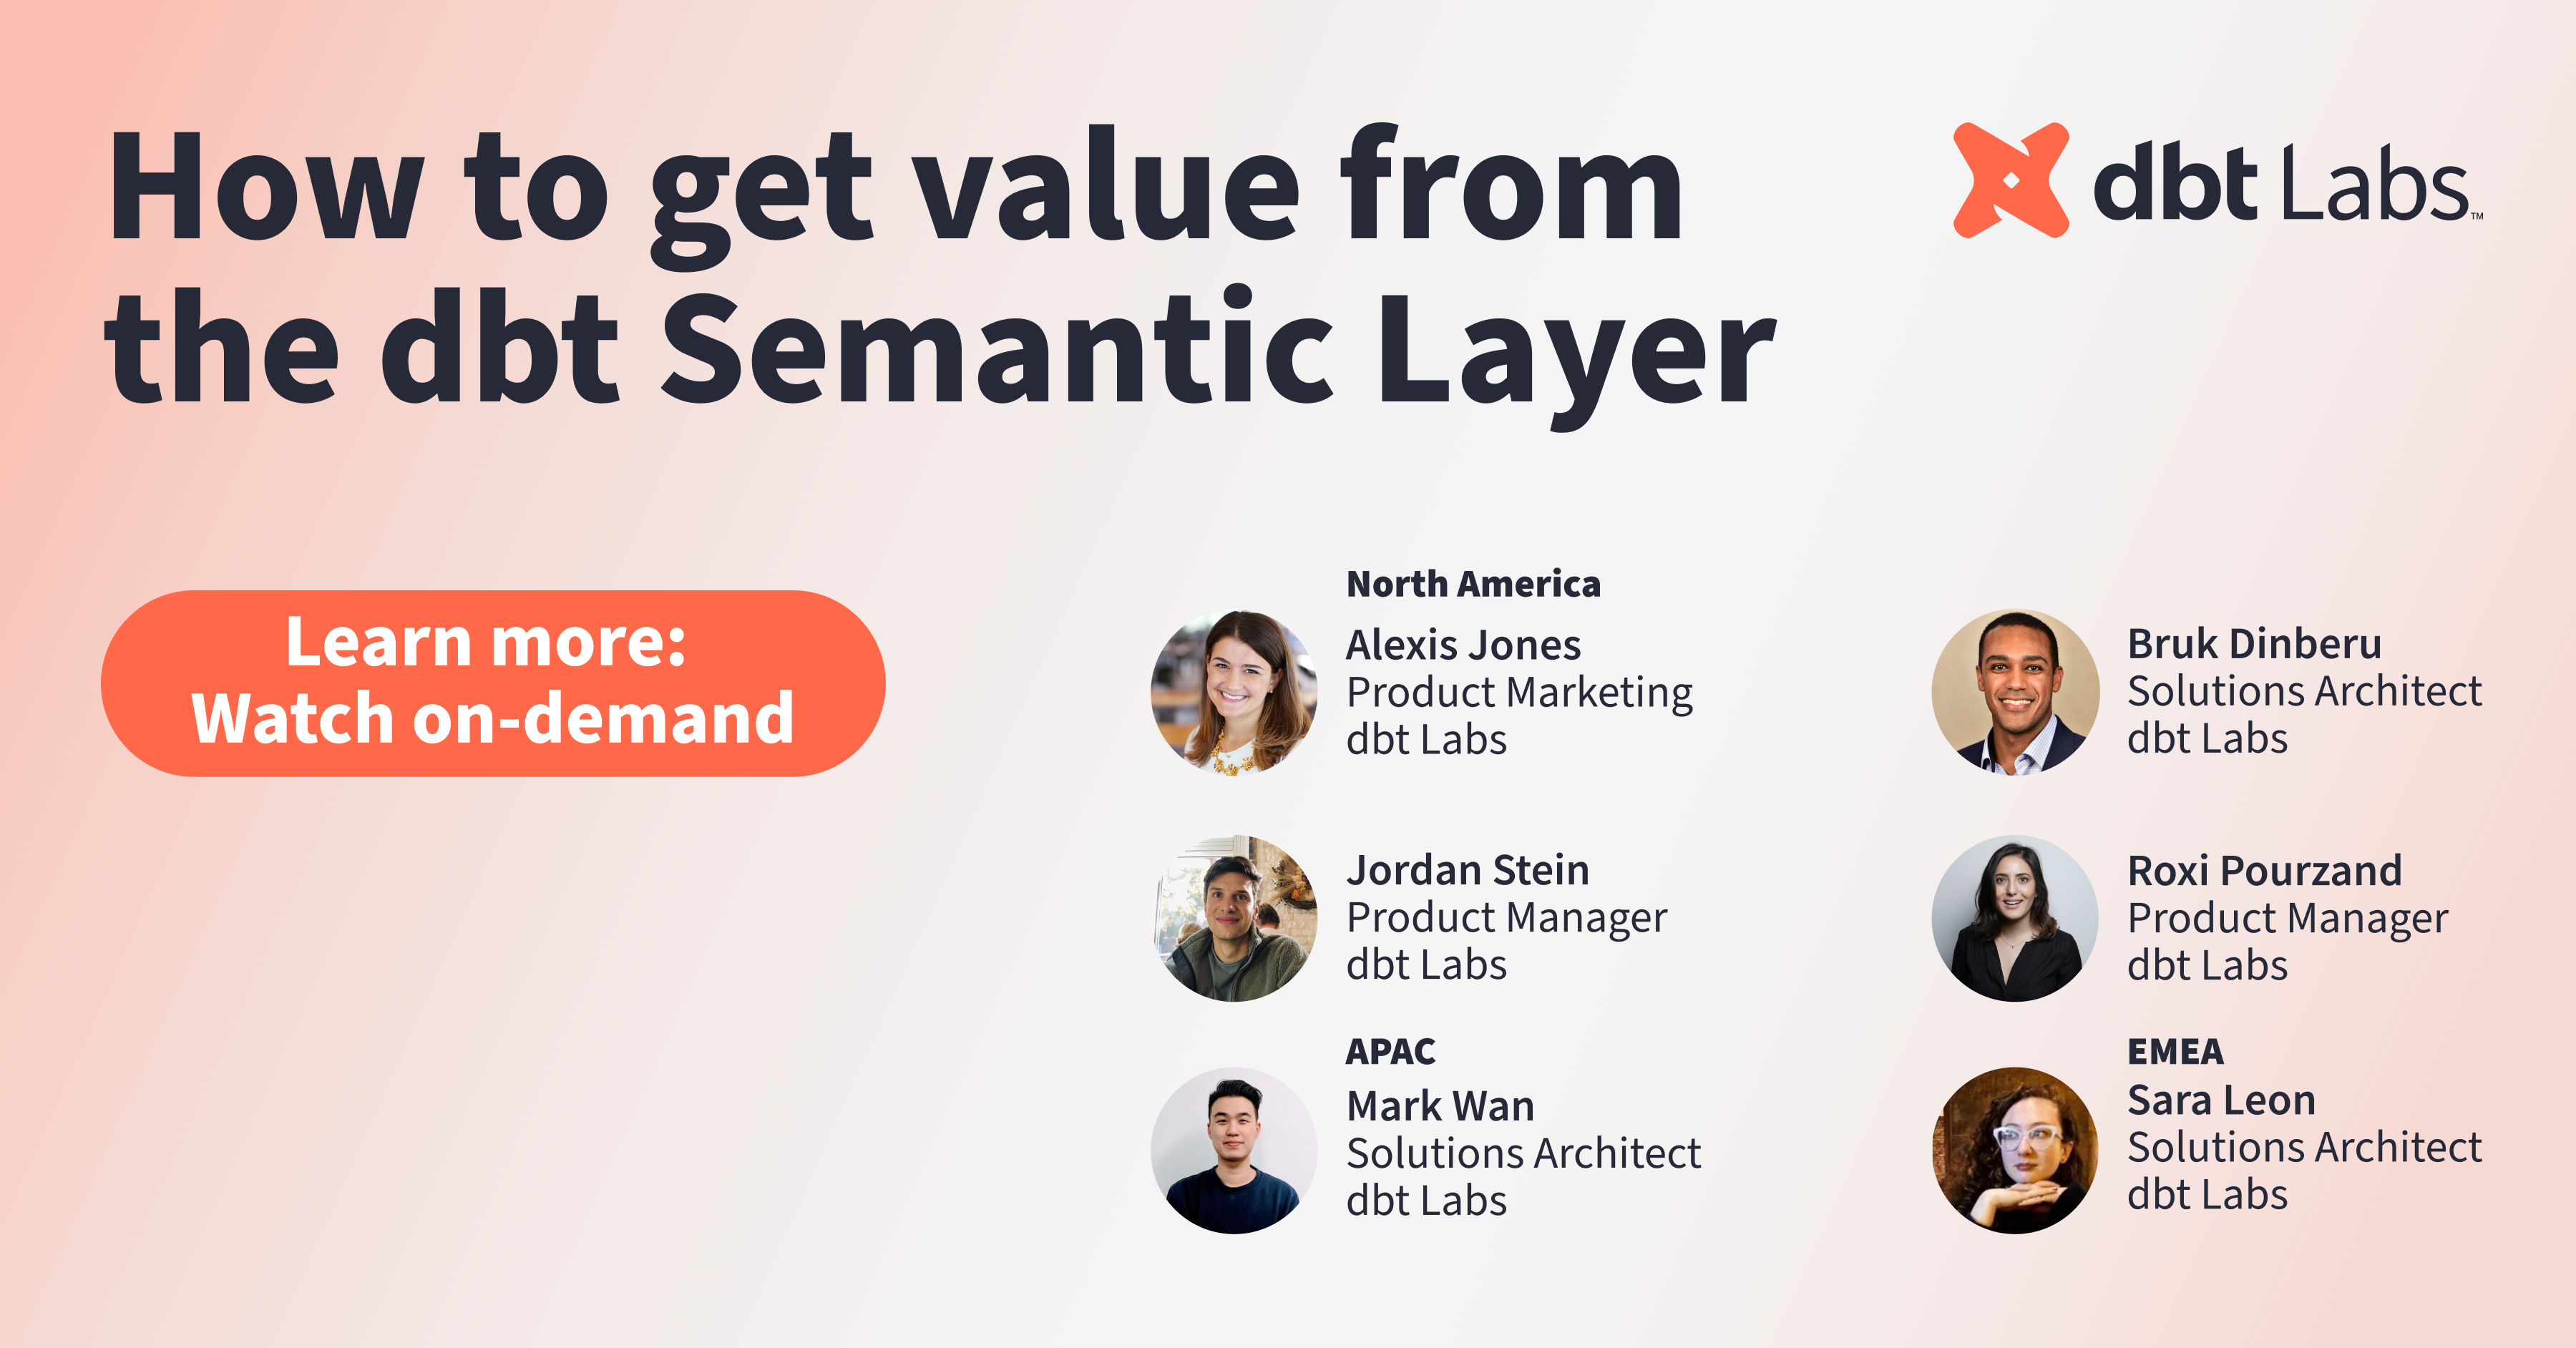 How to get value from the dbt Semantic Layer